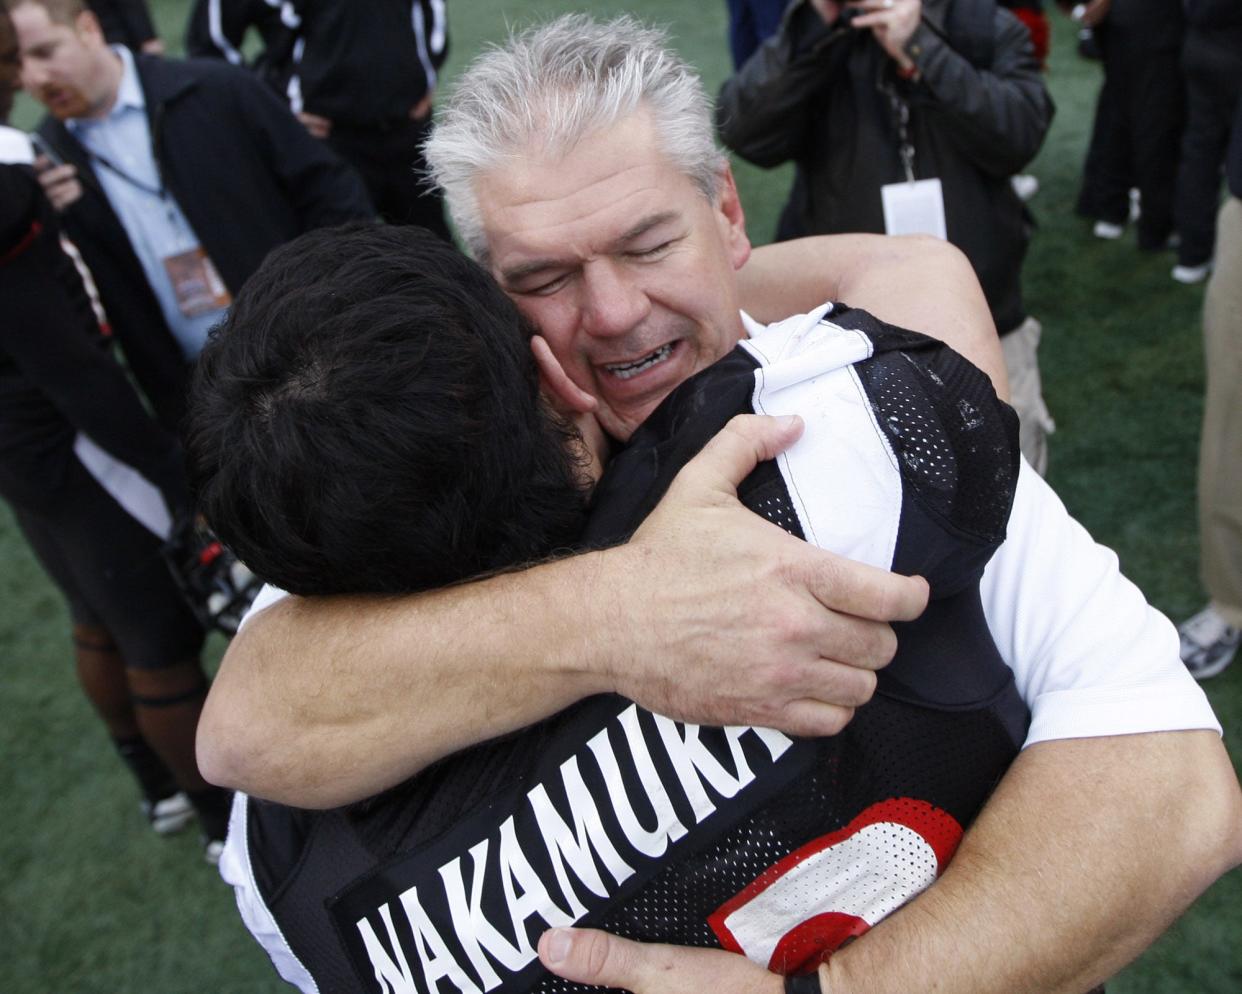 University of Cincinnati defensive backs coach Kerry Coombs celebrates with defensive back Haruki Nakamura after their 31-21 win against Southern Mississippi in the PapaJohns.com Bowl in Birmingham, Alabama Saturday December 22, 2007.